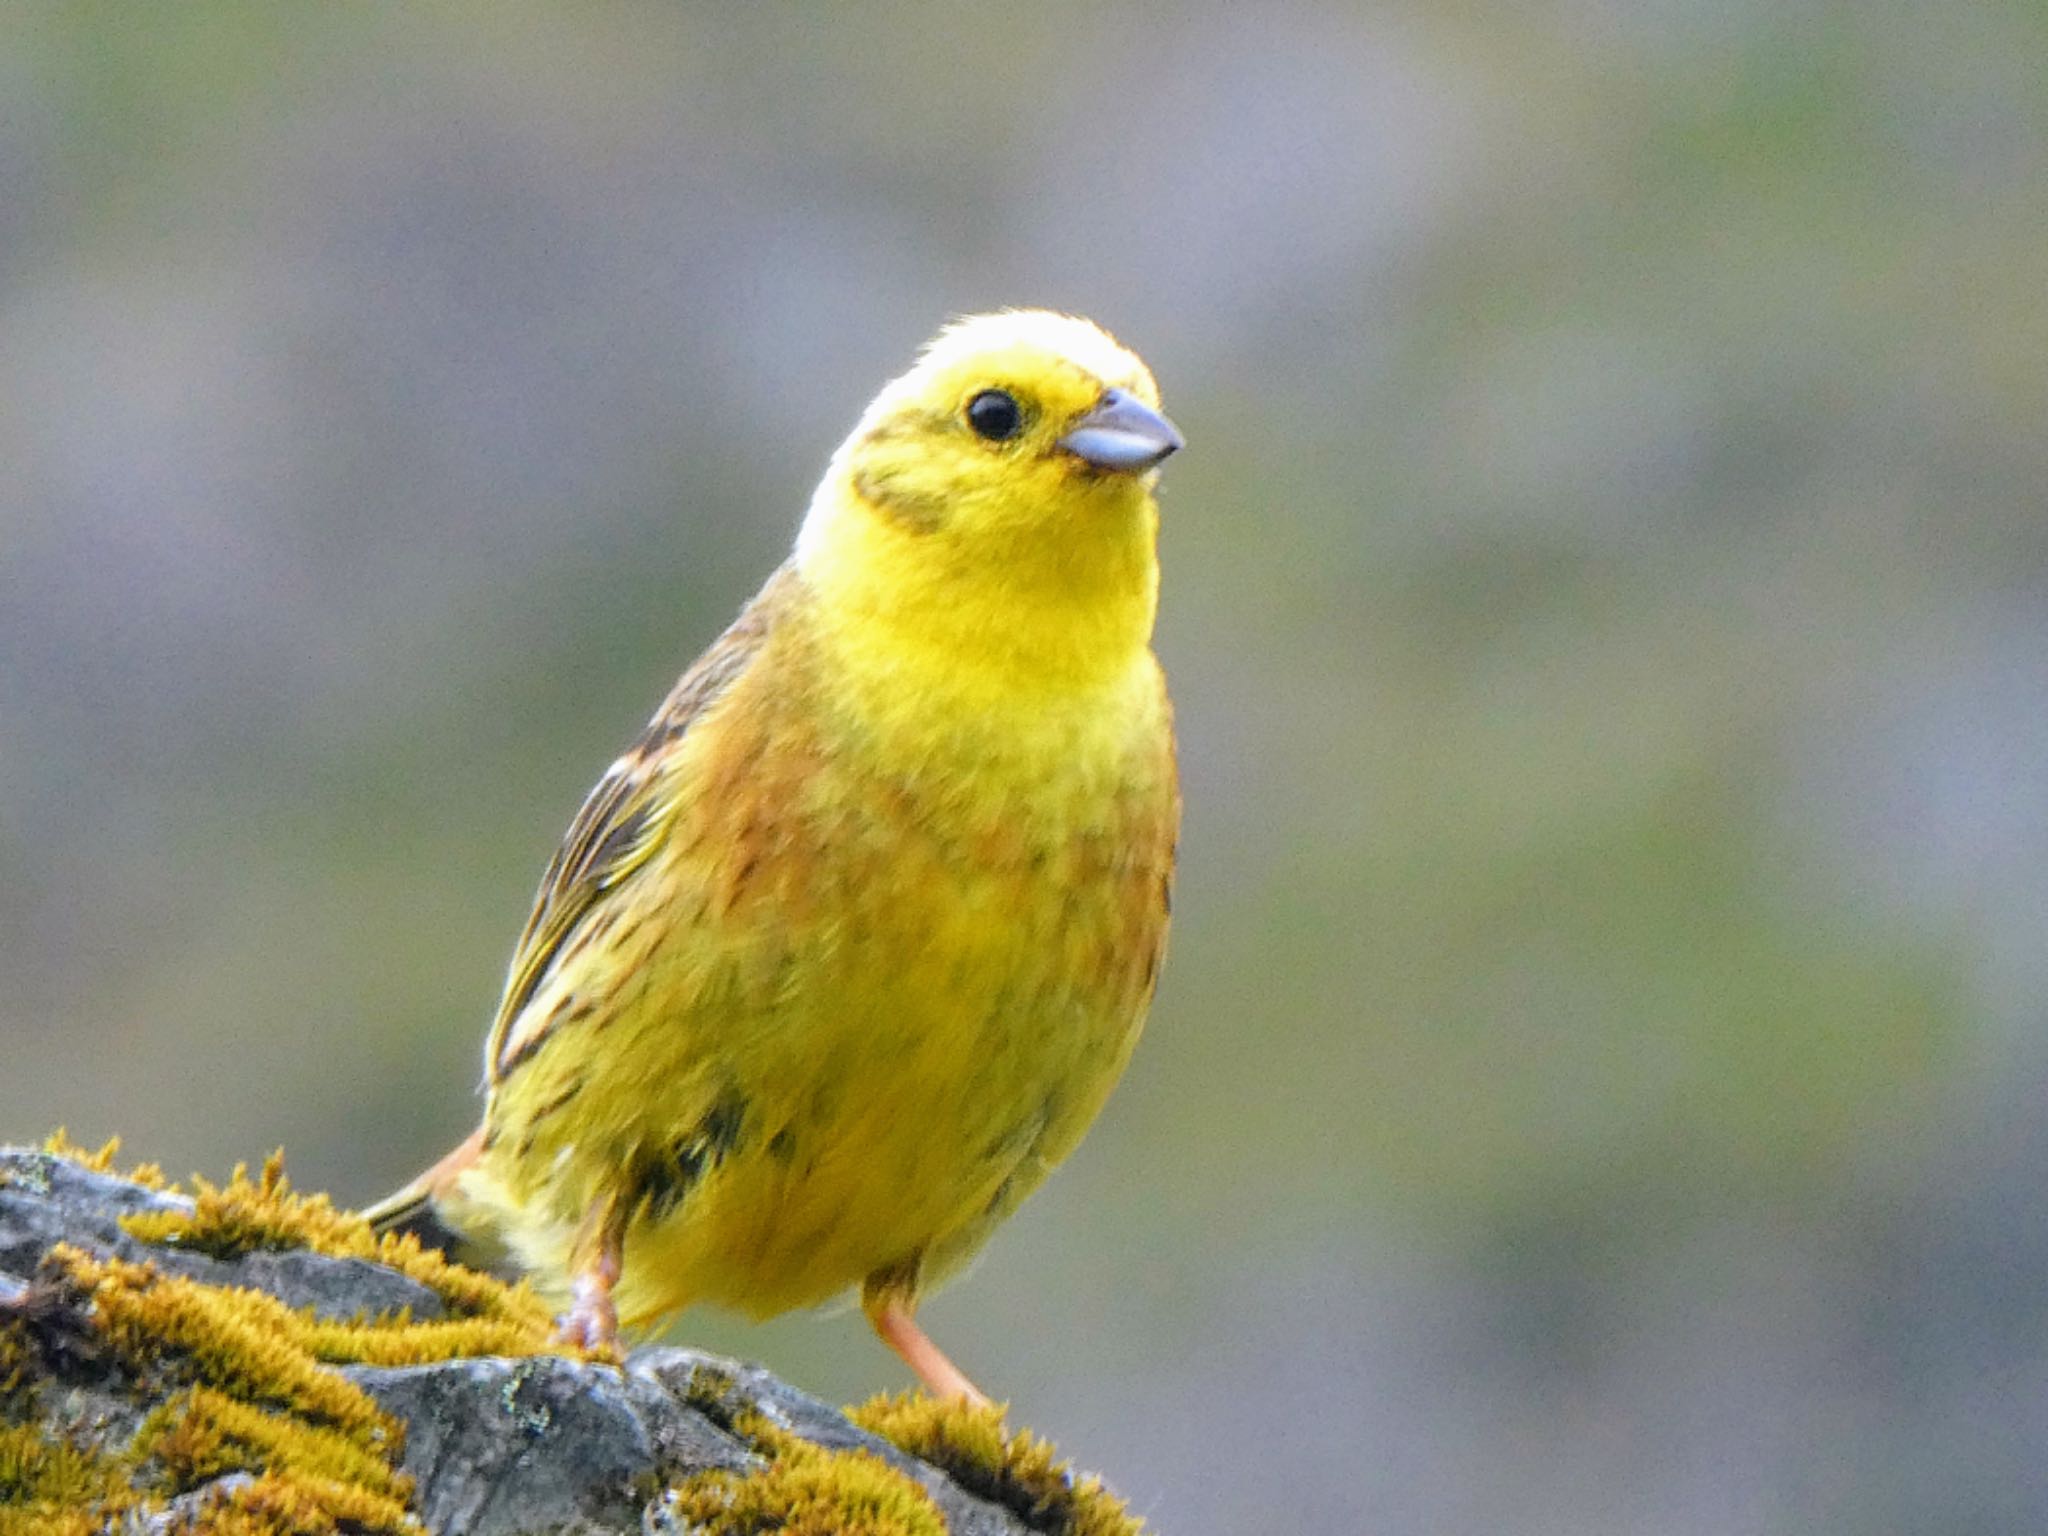 Photo of Yellowhammer at Hooker Valley Track, Aoraki/Mt Cook, New Zealand by Maki